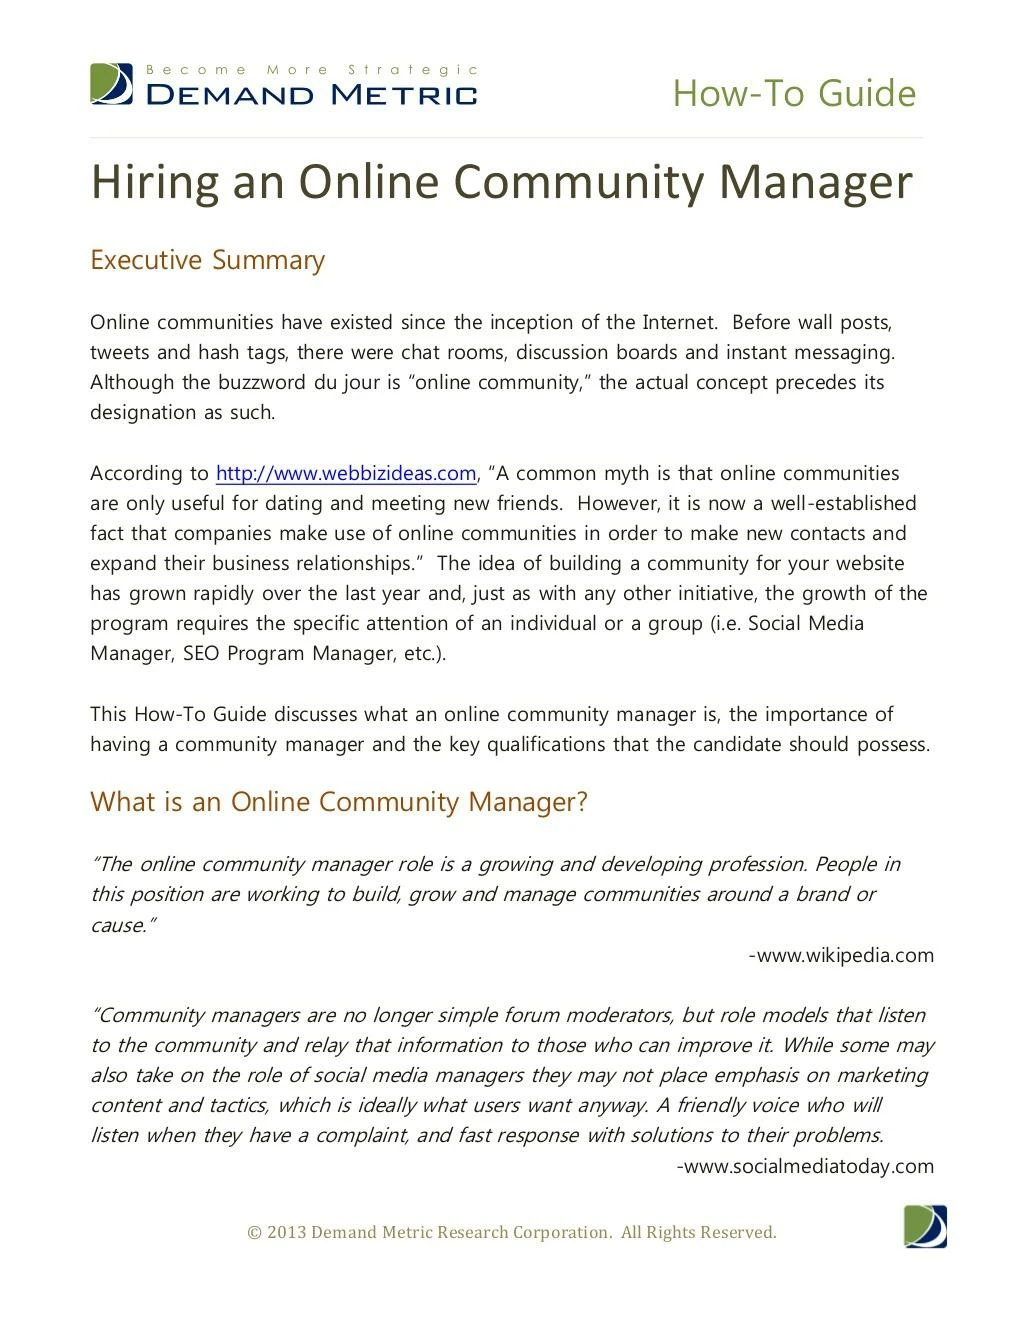 how to guide hiring an online community manager